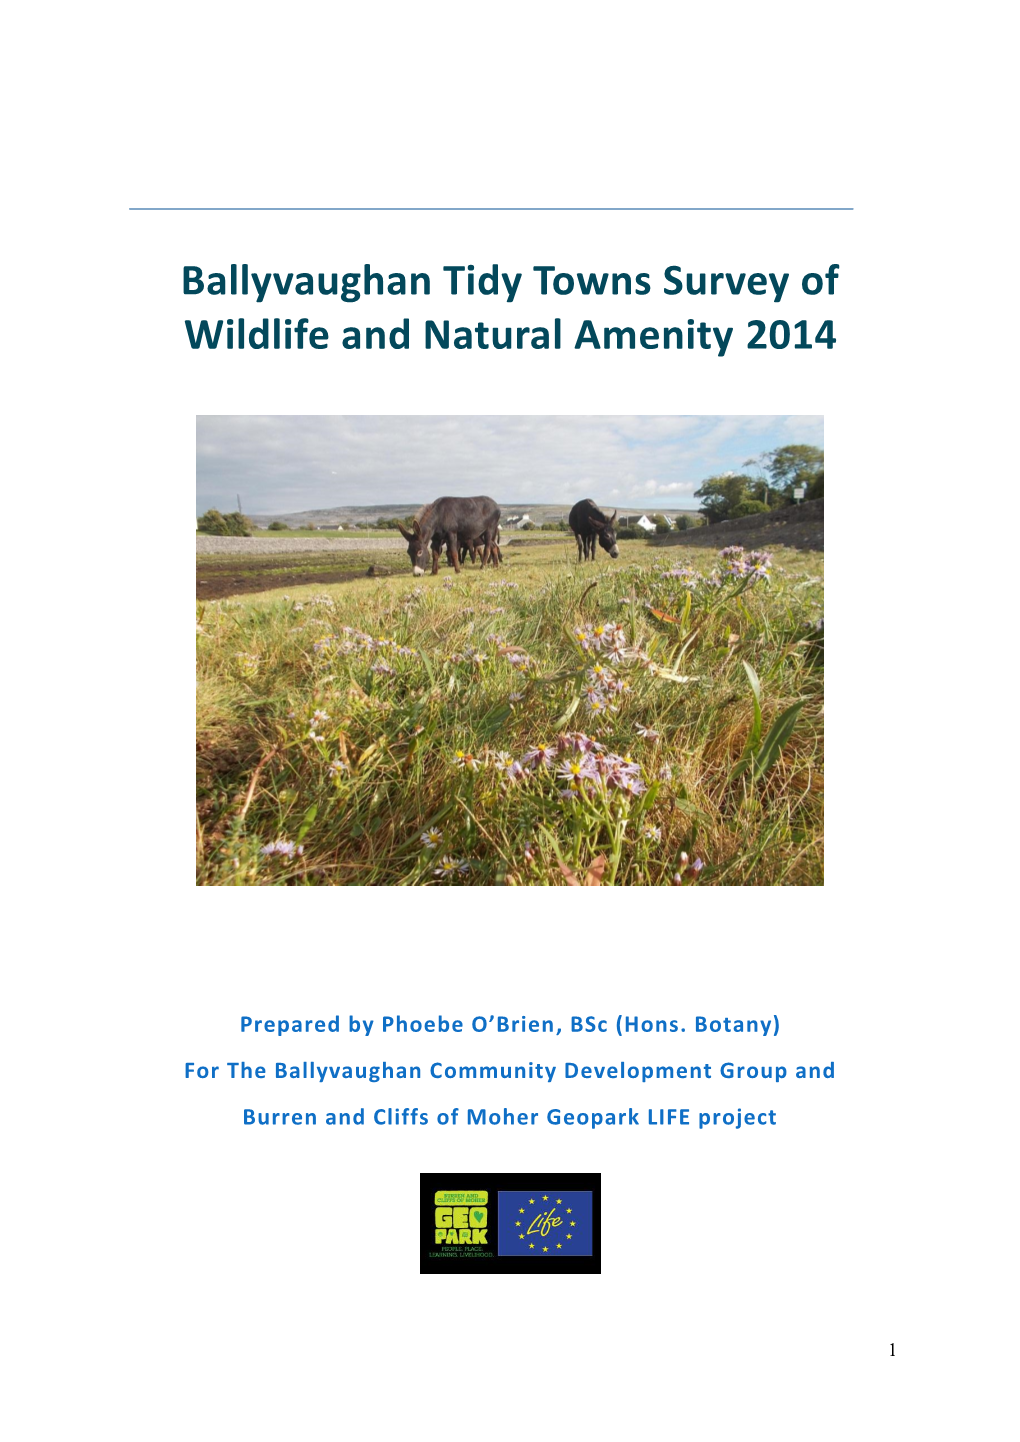 Ballyvaughan Tidy Towns Survey of Wildlife and Natural Amenity 2014